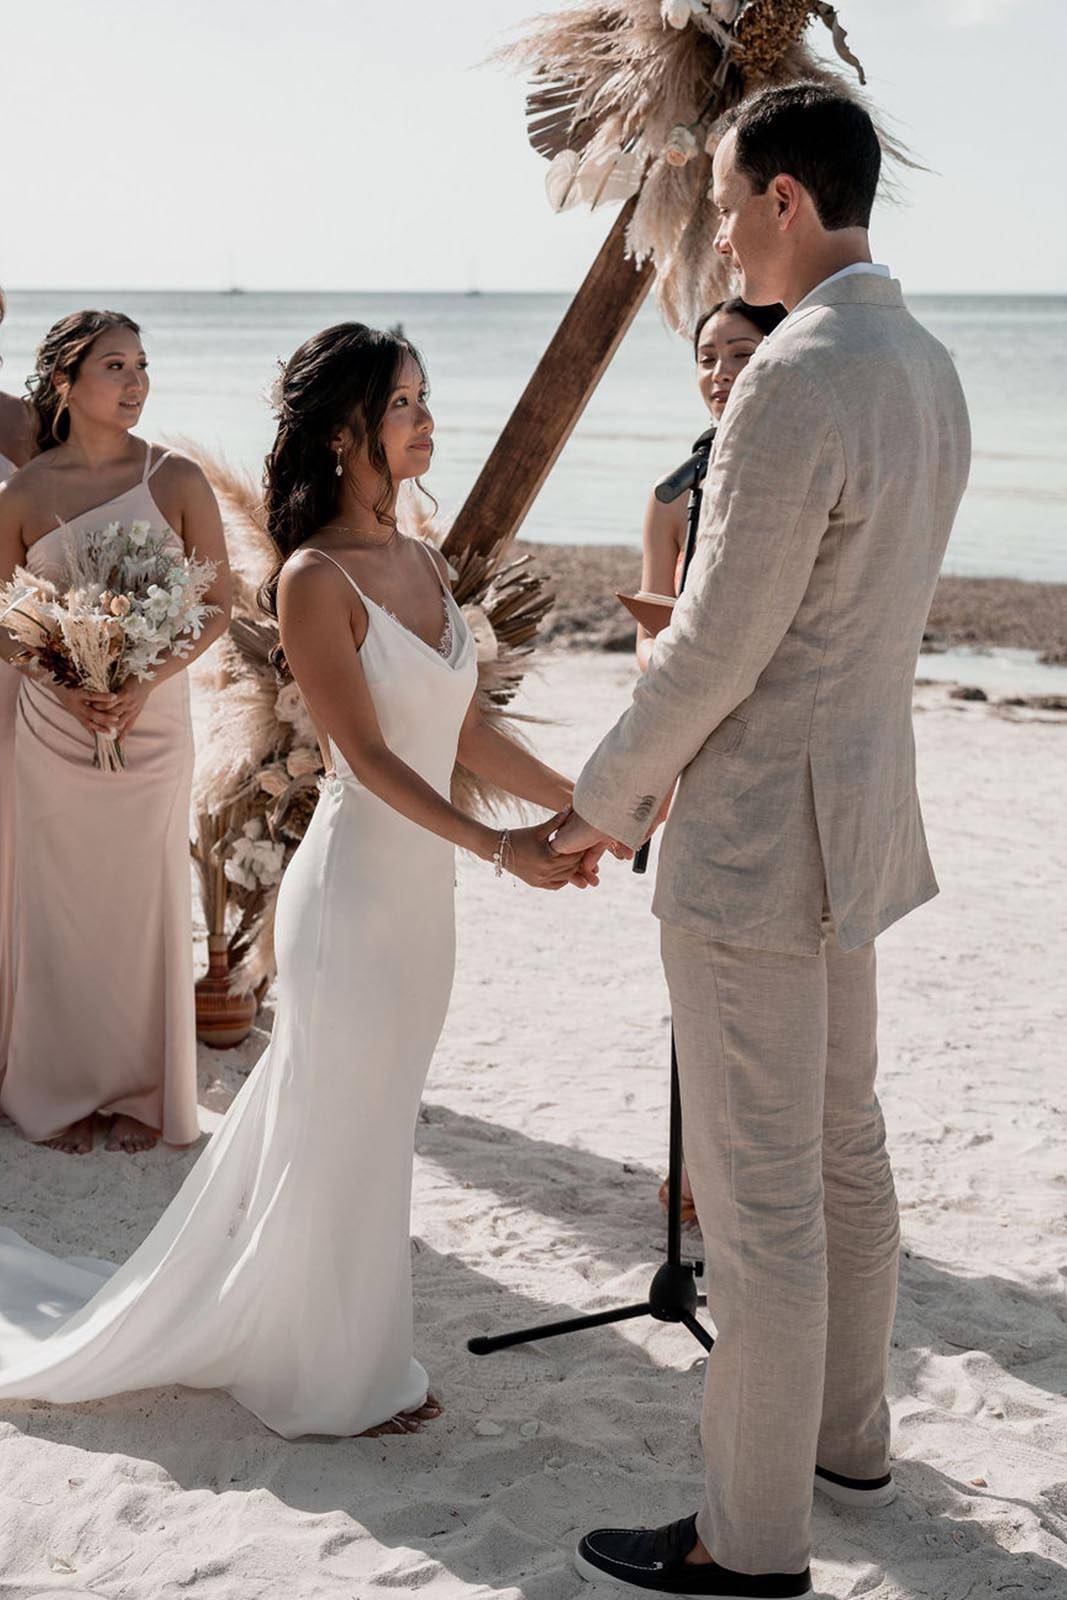 Bride and groom, exchanging vows on the beach